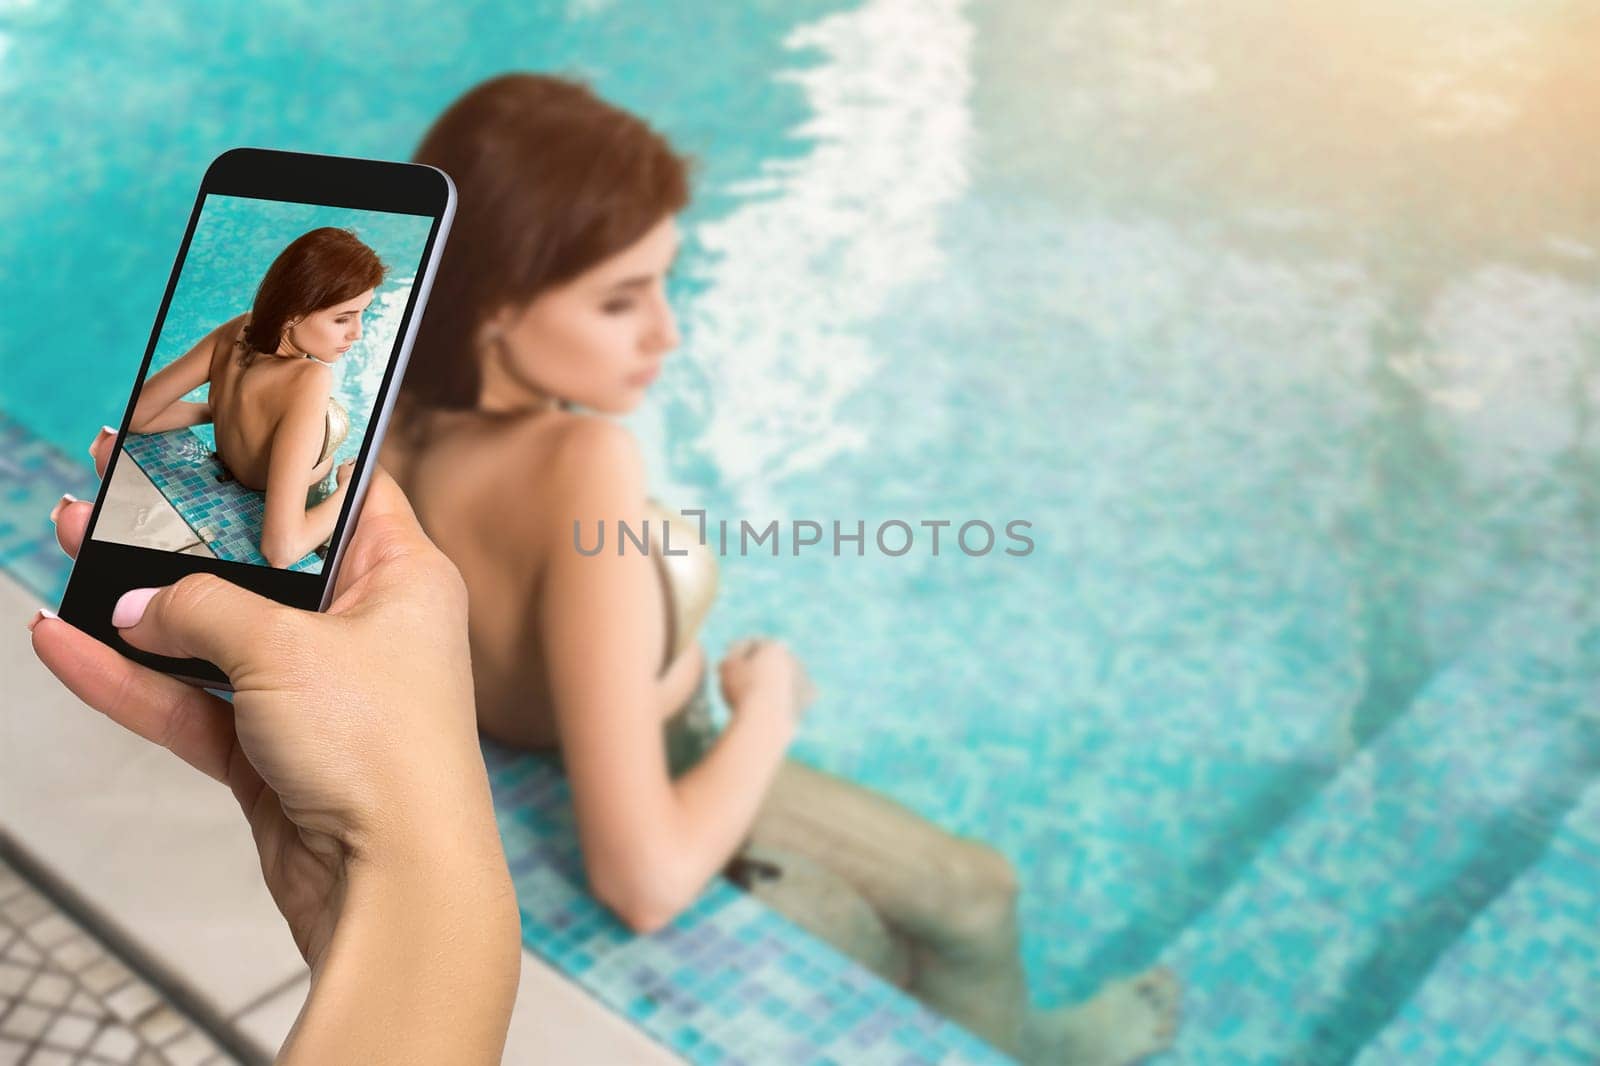 Closely image of female hands holding mobile phone with photo camera mode on the screen. Cropped image of beautiful long hair female model posing by the pool by nazarovsergey